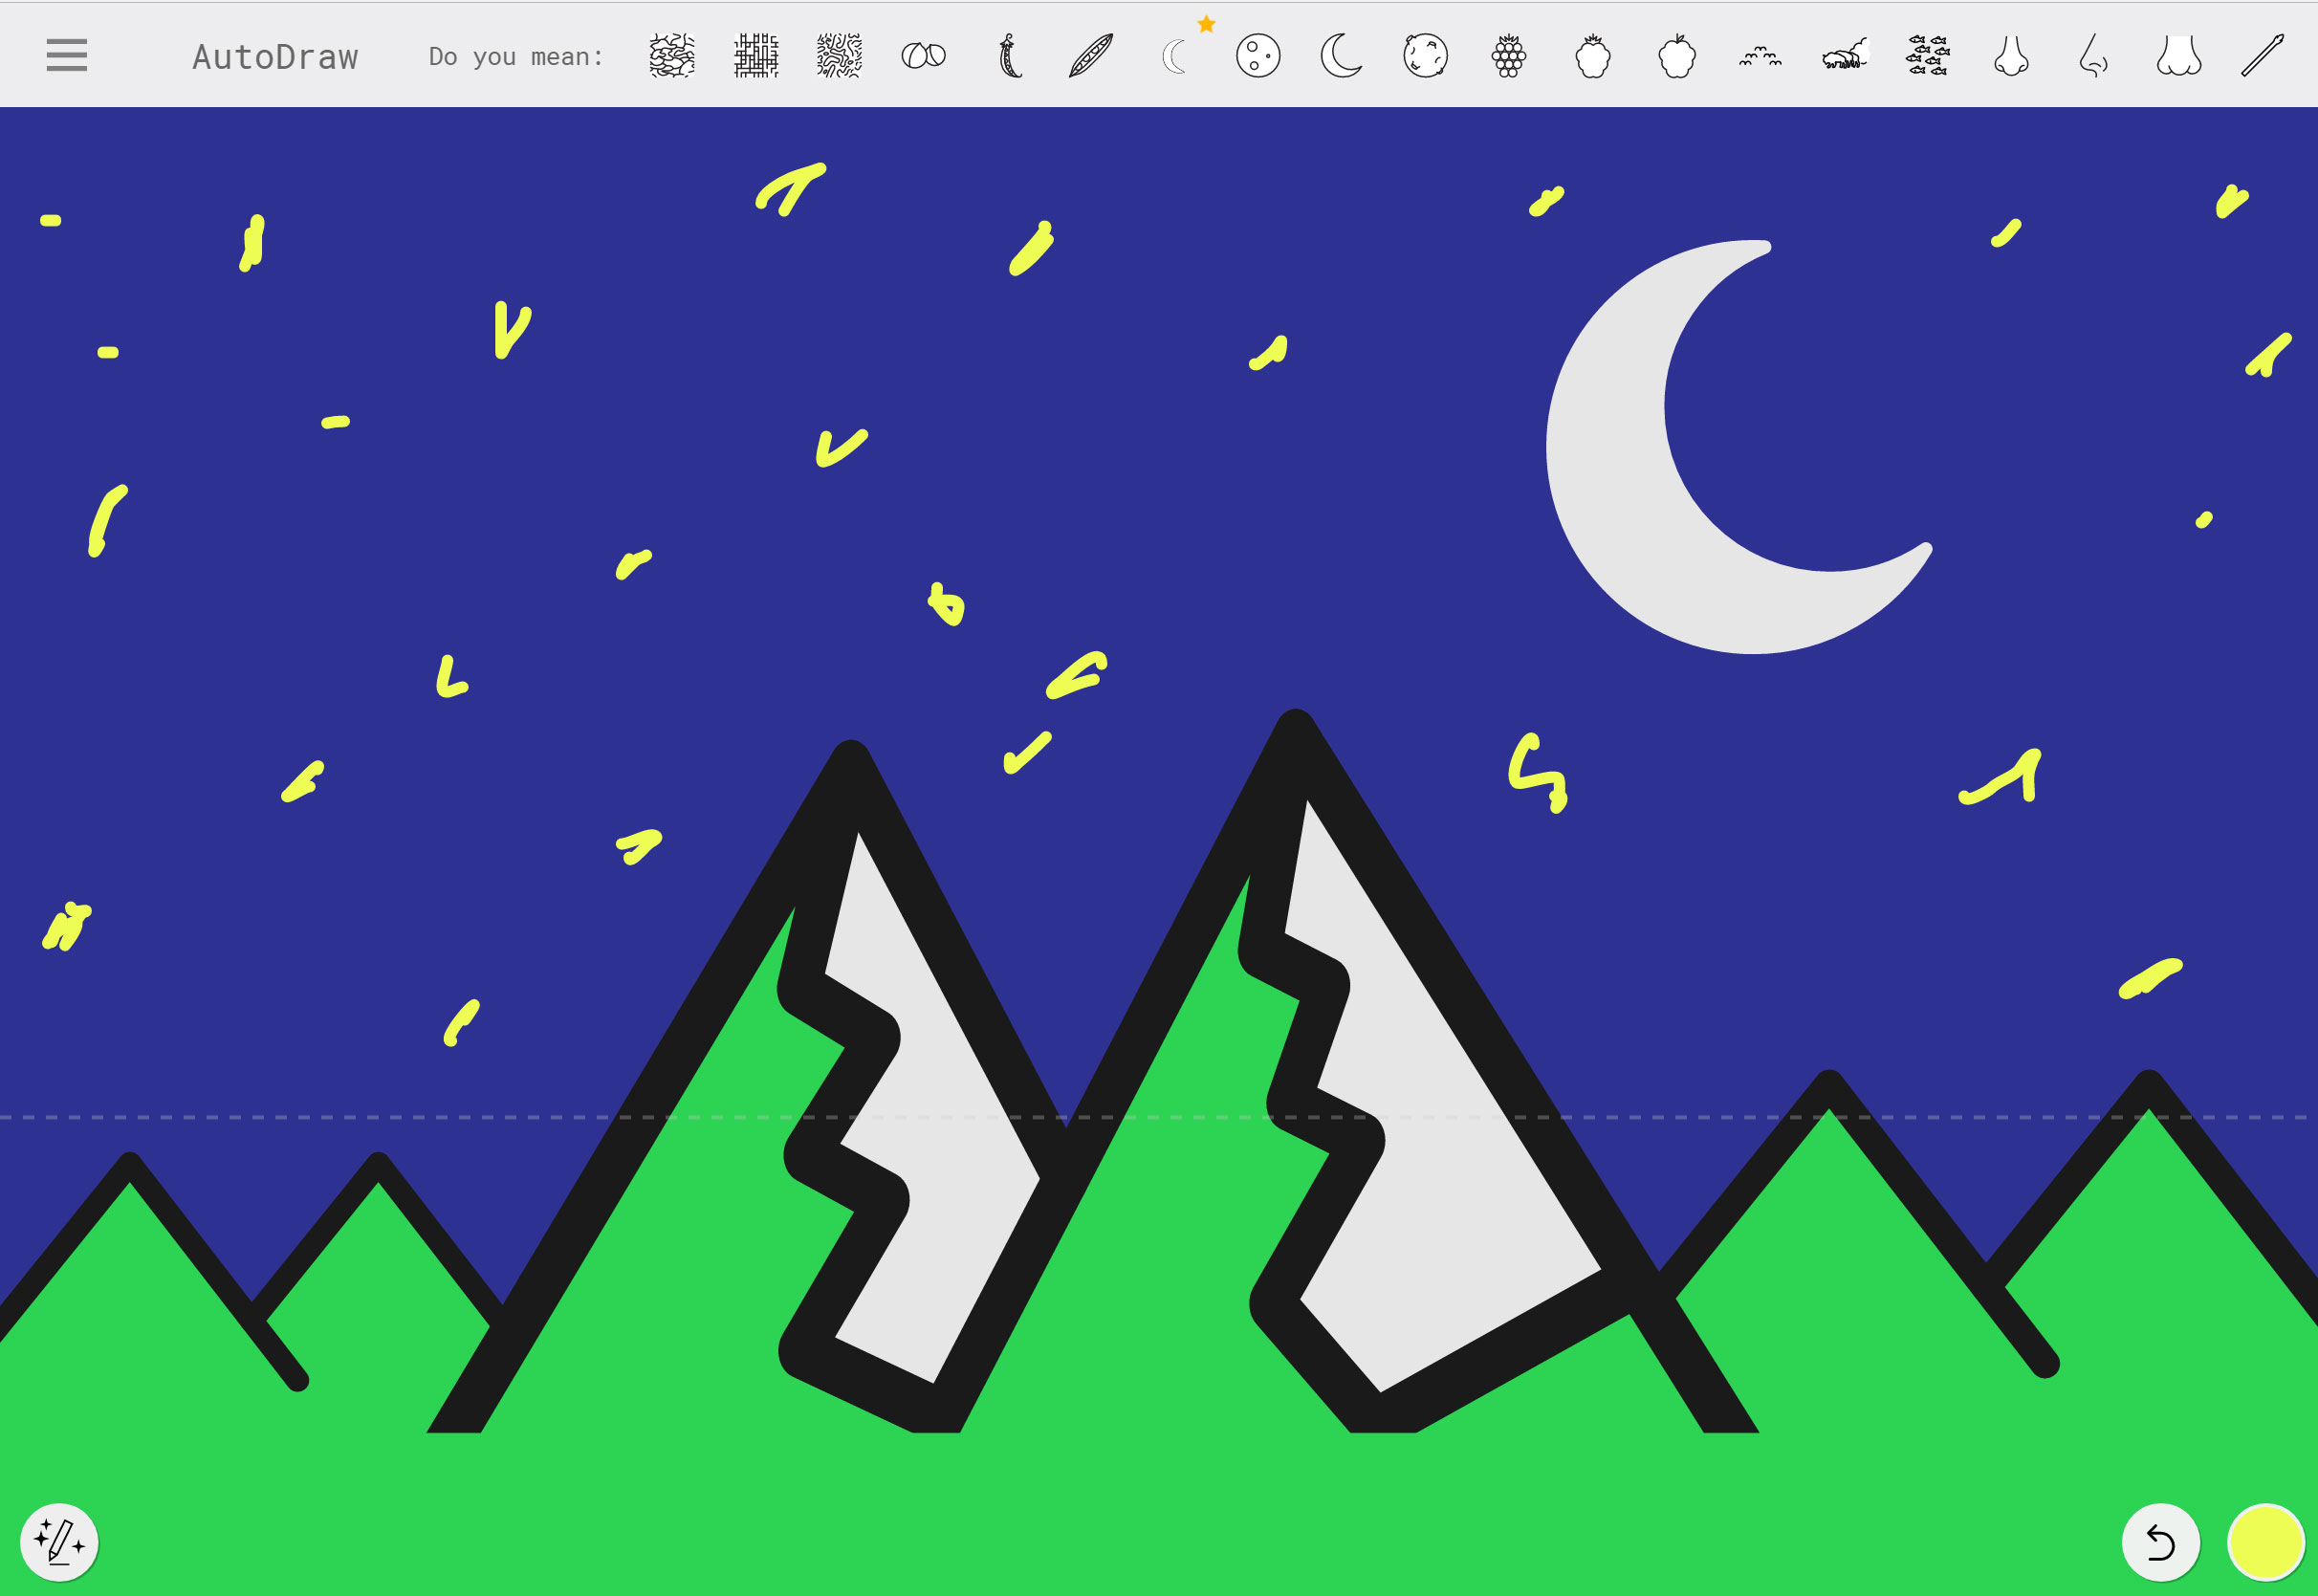 Google's AutoDraw shows machine learning through scribbles – Pickr